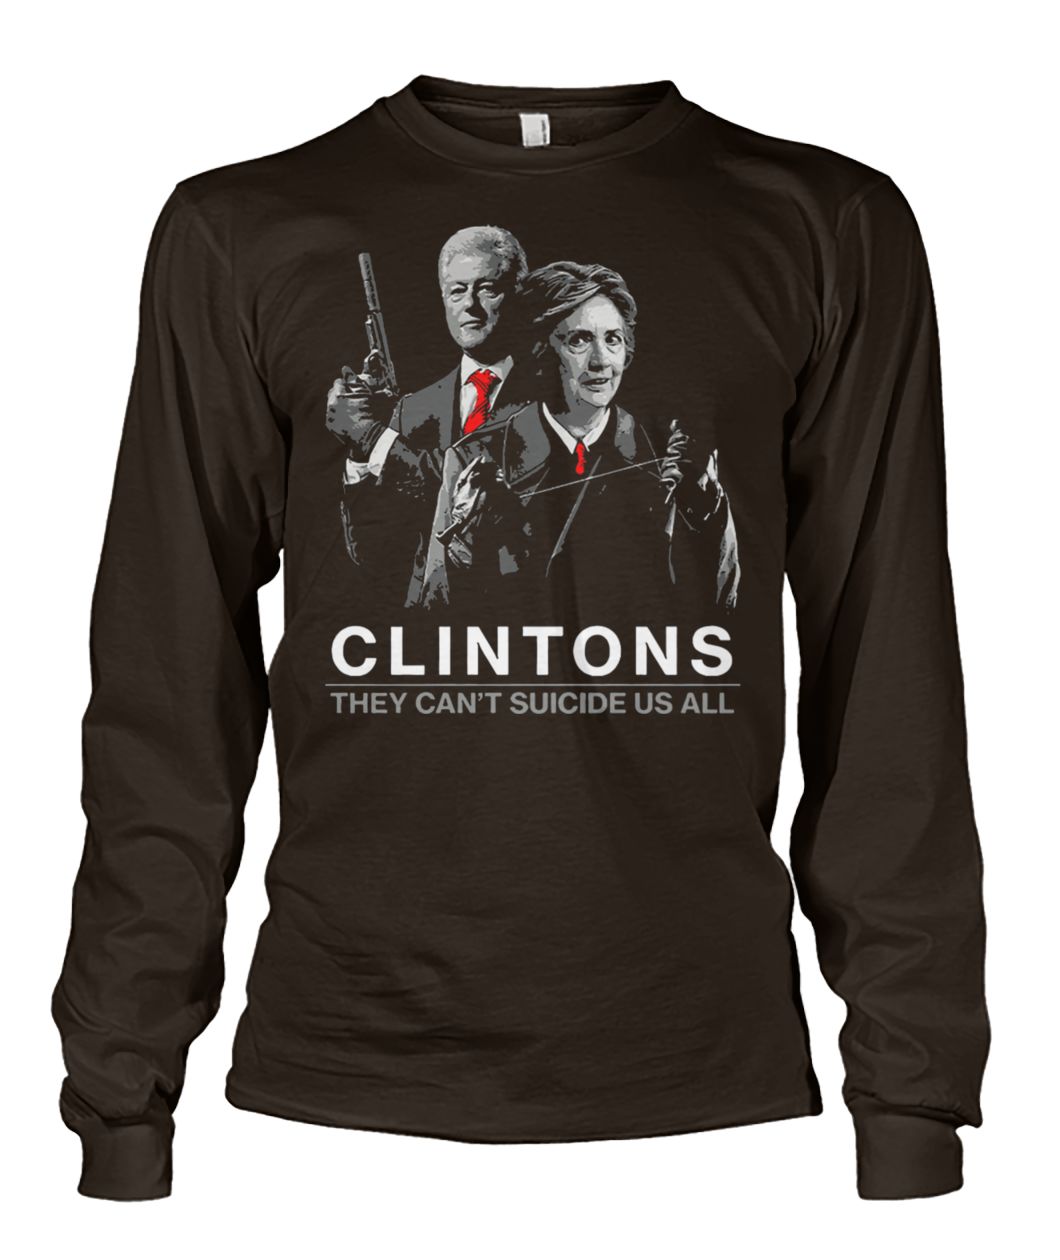 Clintons they can't suicide us all unisex long sleeve